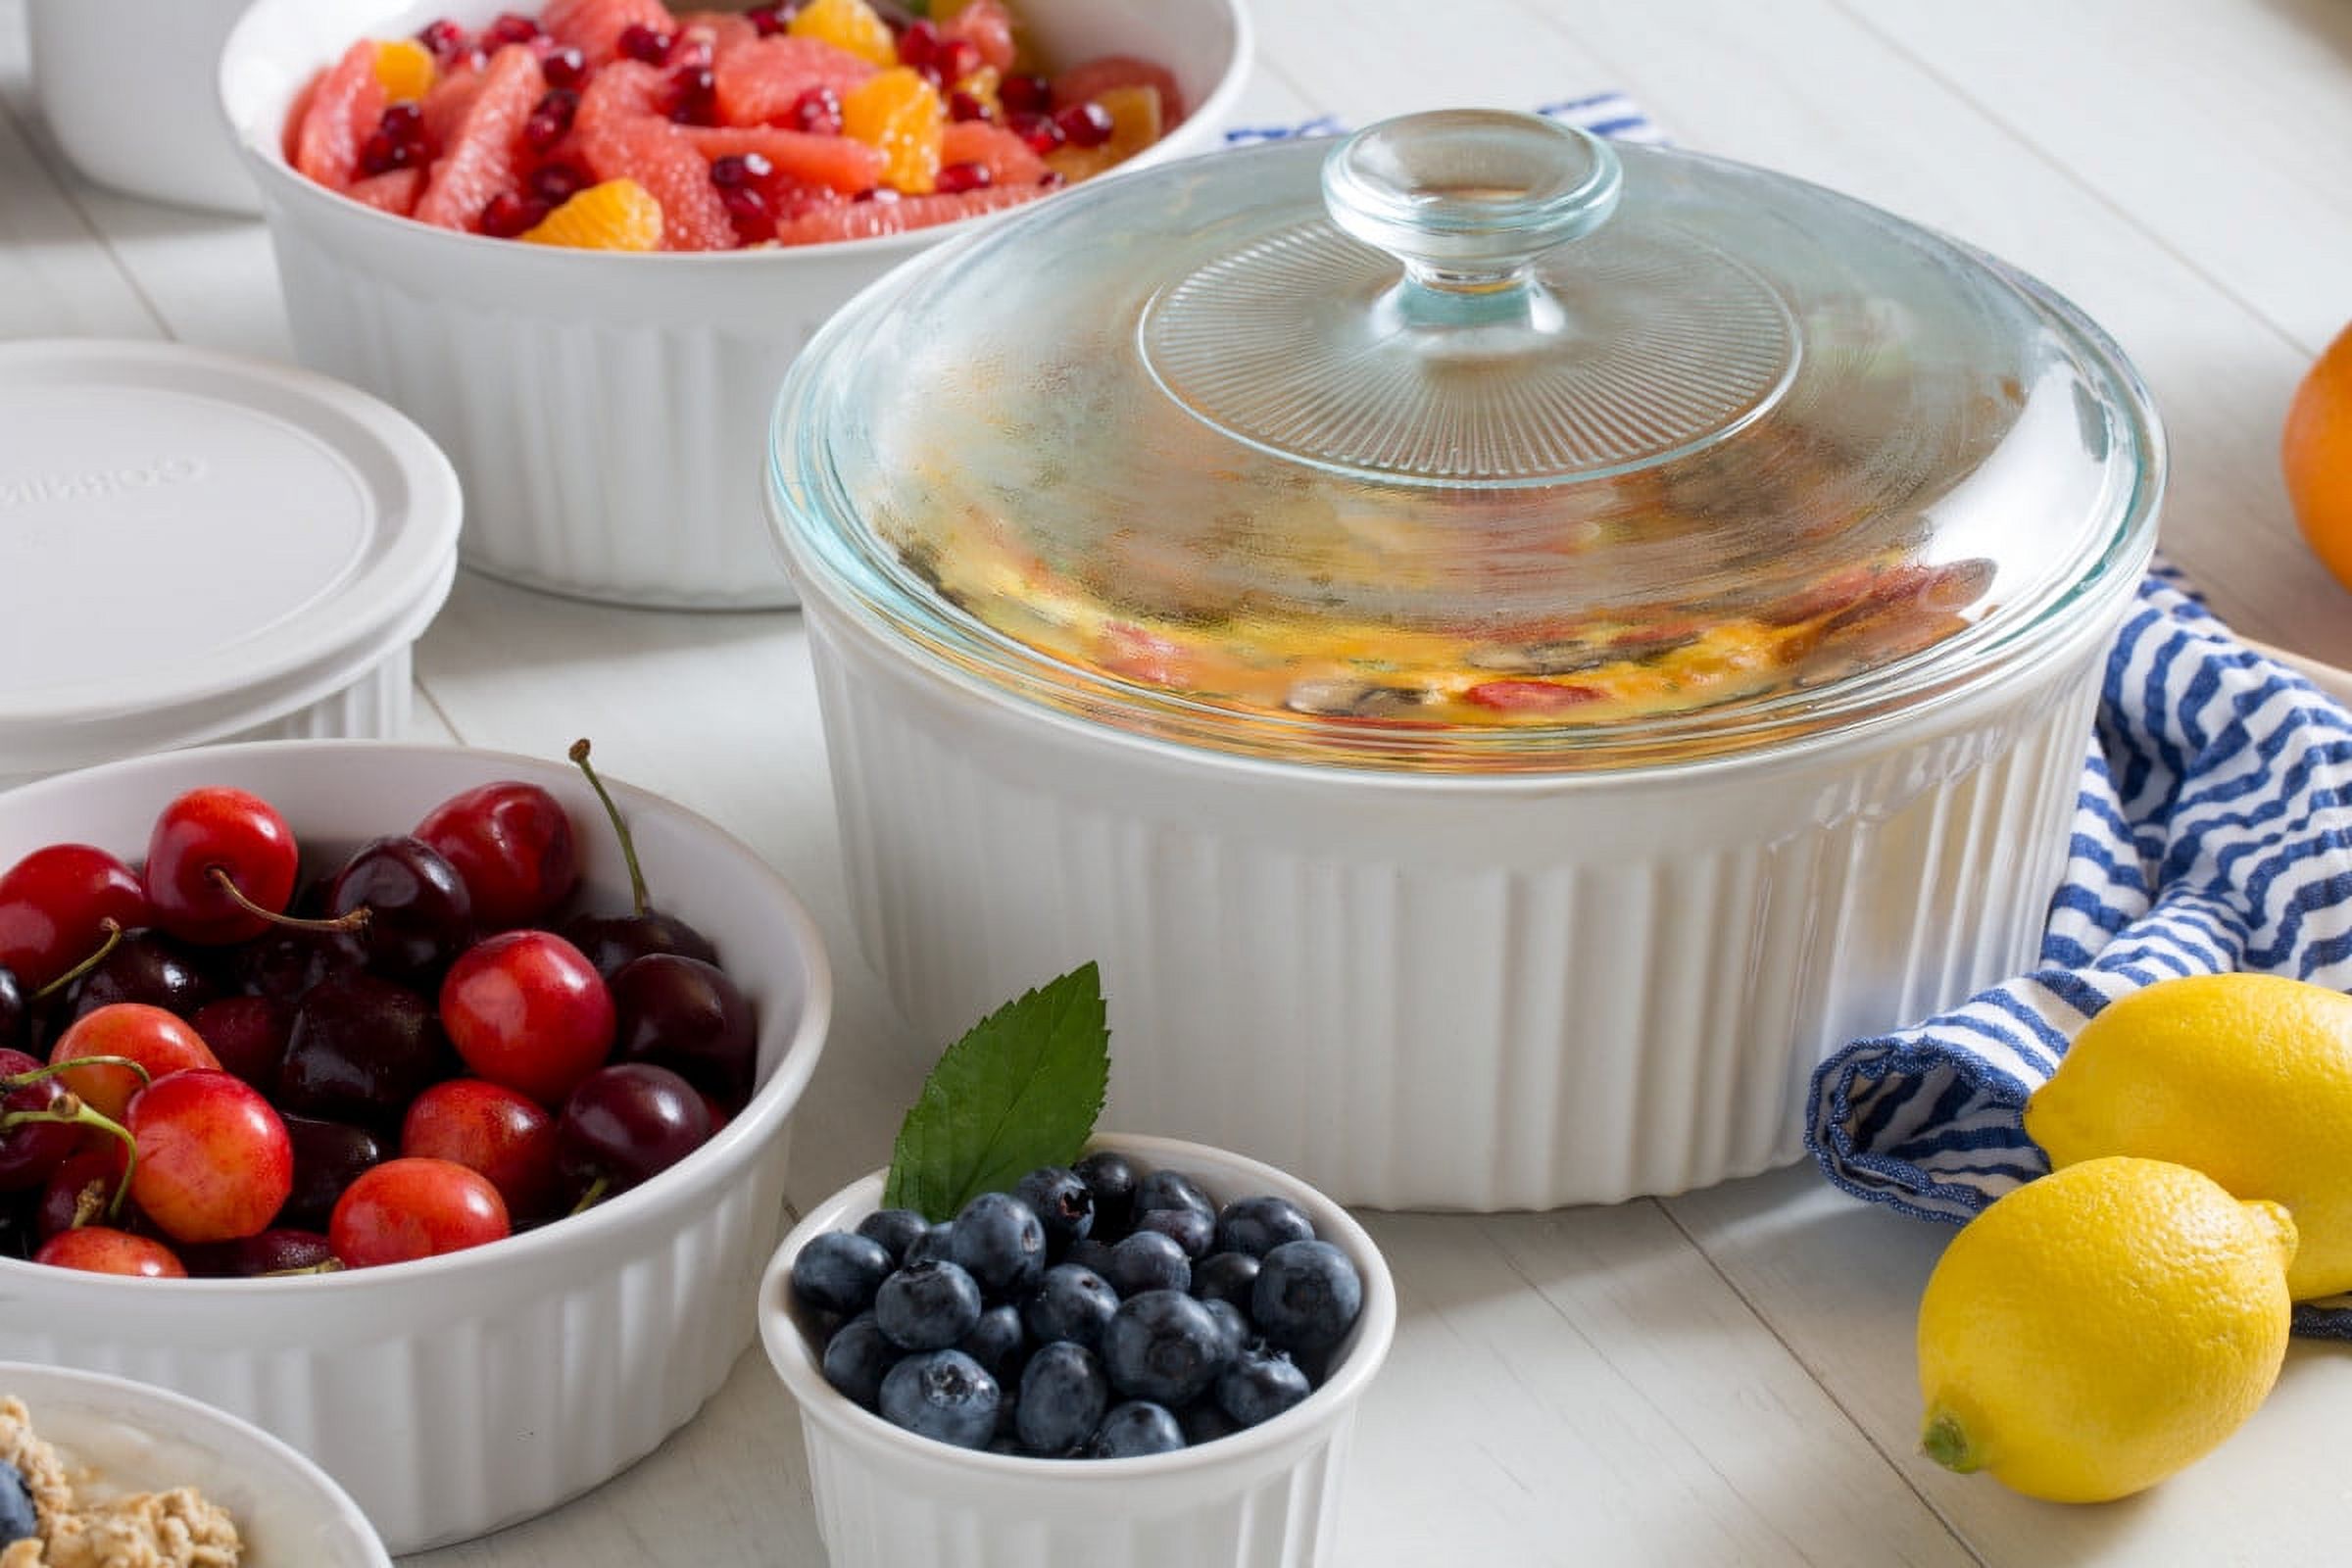 CorningWare French White 8-Piece Ceramic Stoneware Casserole Set with Glass and Plastic Lids, Round & Oval - image 2 of 6